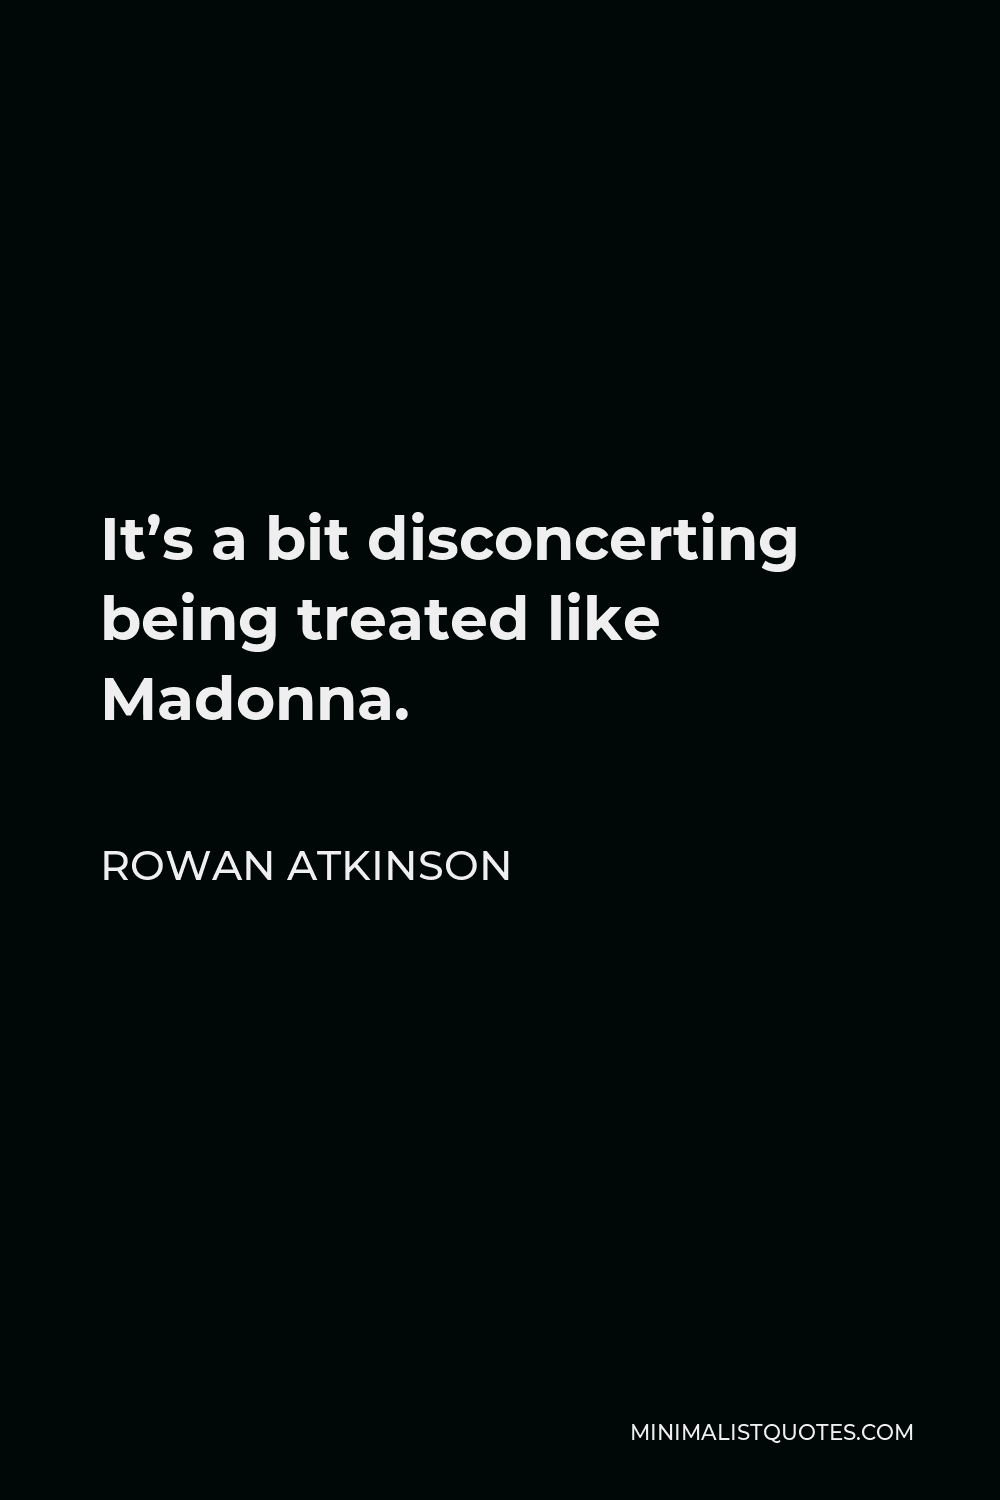 Rowan Atkinson Quote - It’s a bit disconcerting being treated like Madonna.